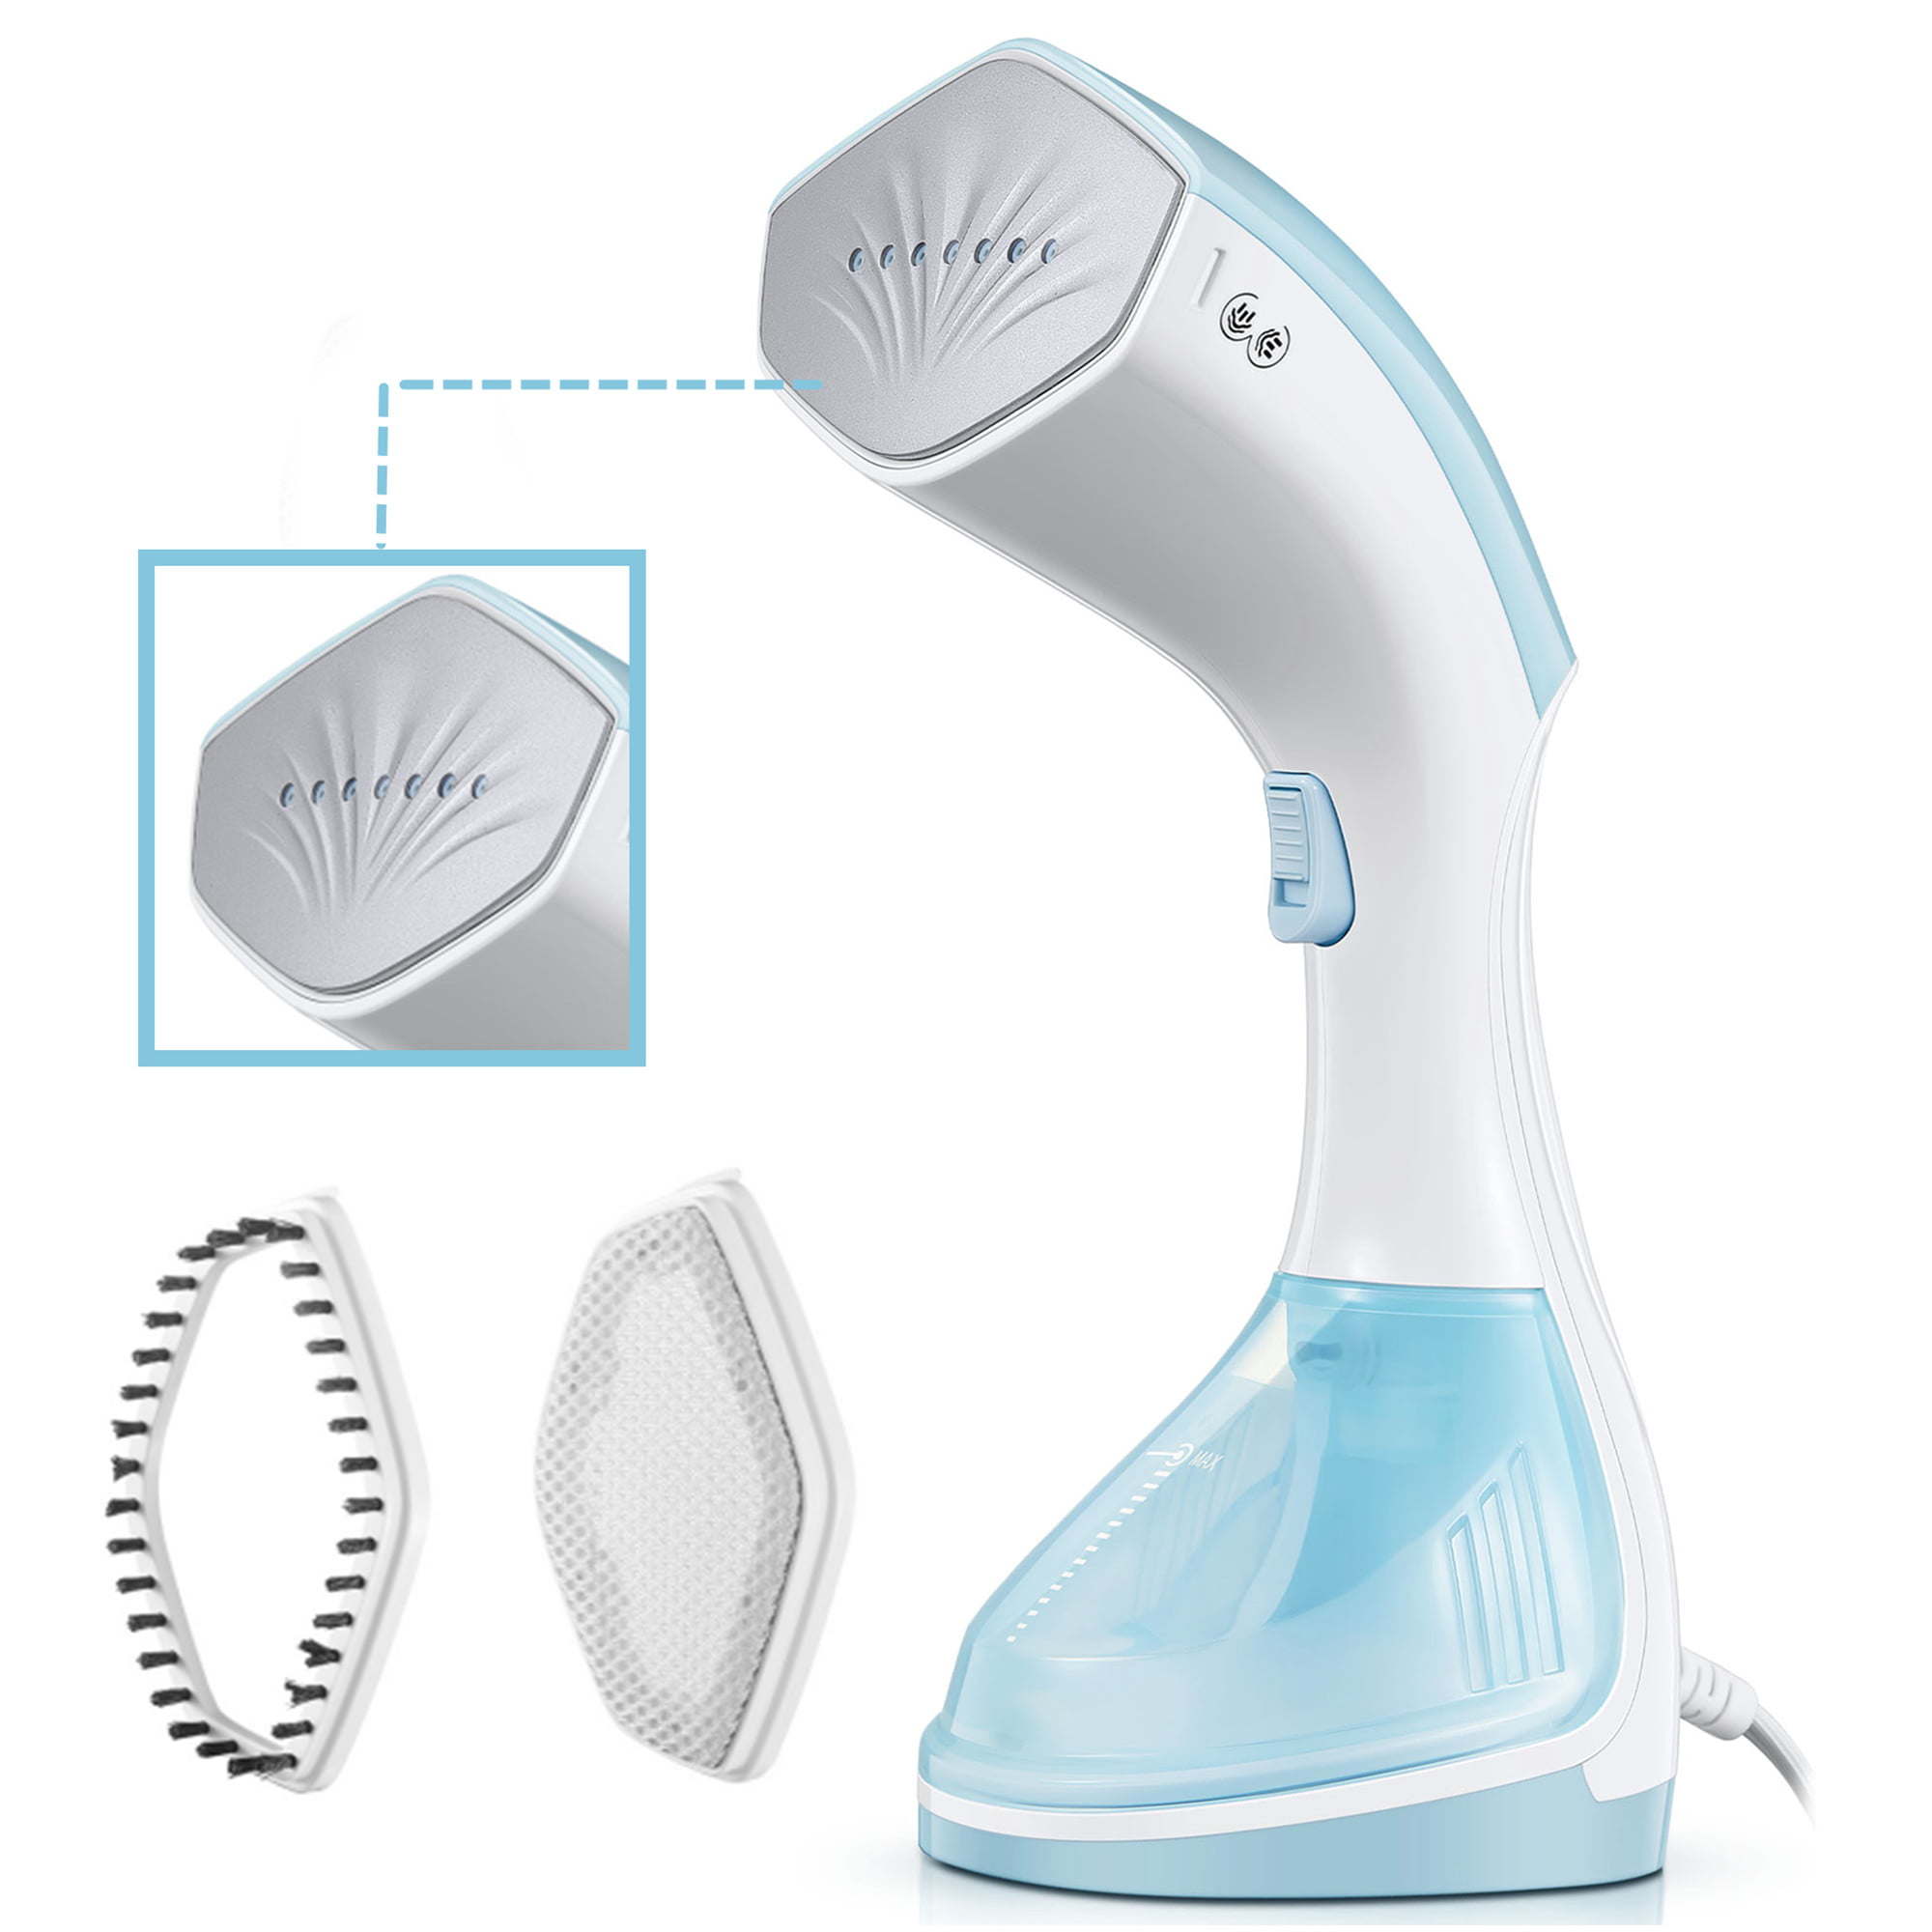 An Garment Steamer in white and blue, with a detachable brush and lint remover, plus a close-up view of the steam panel. This 1500 watts steamer efficiently smooths